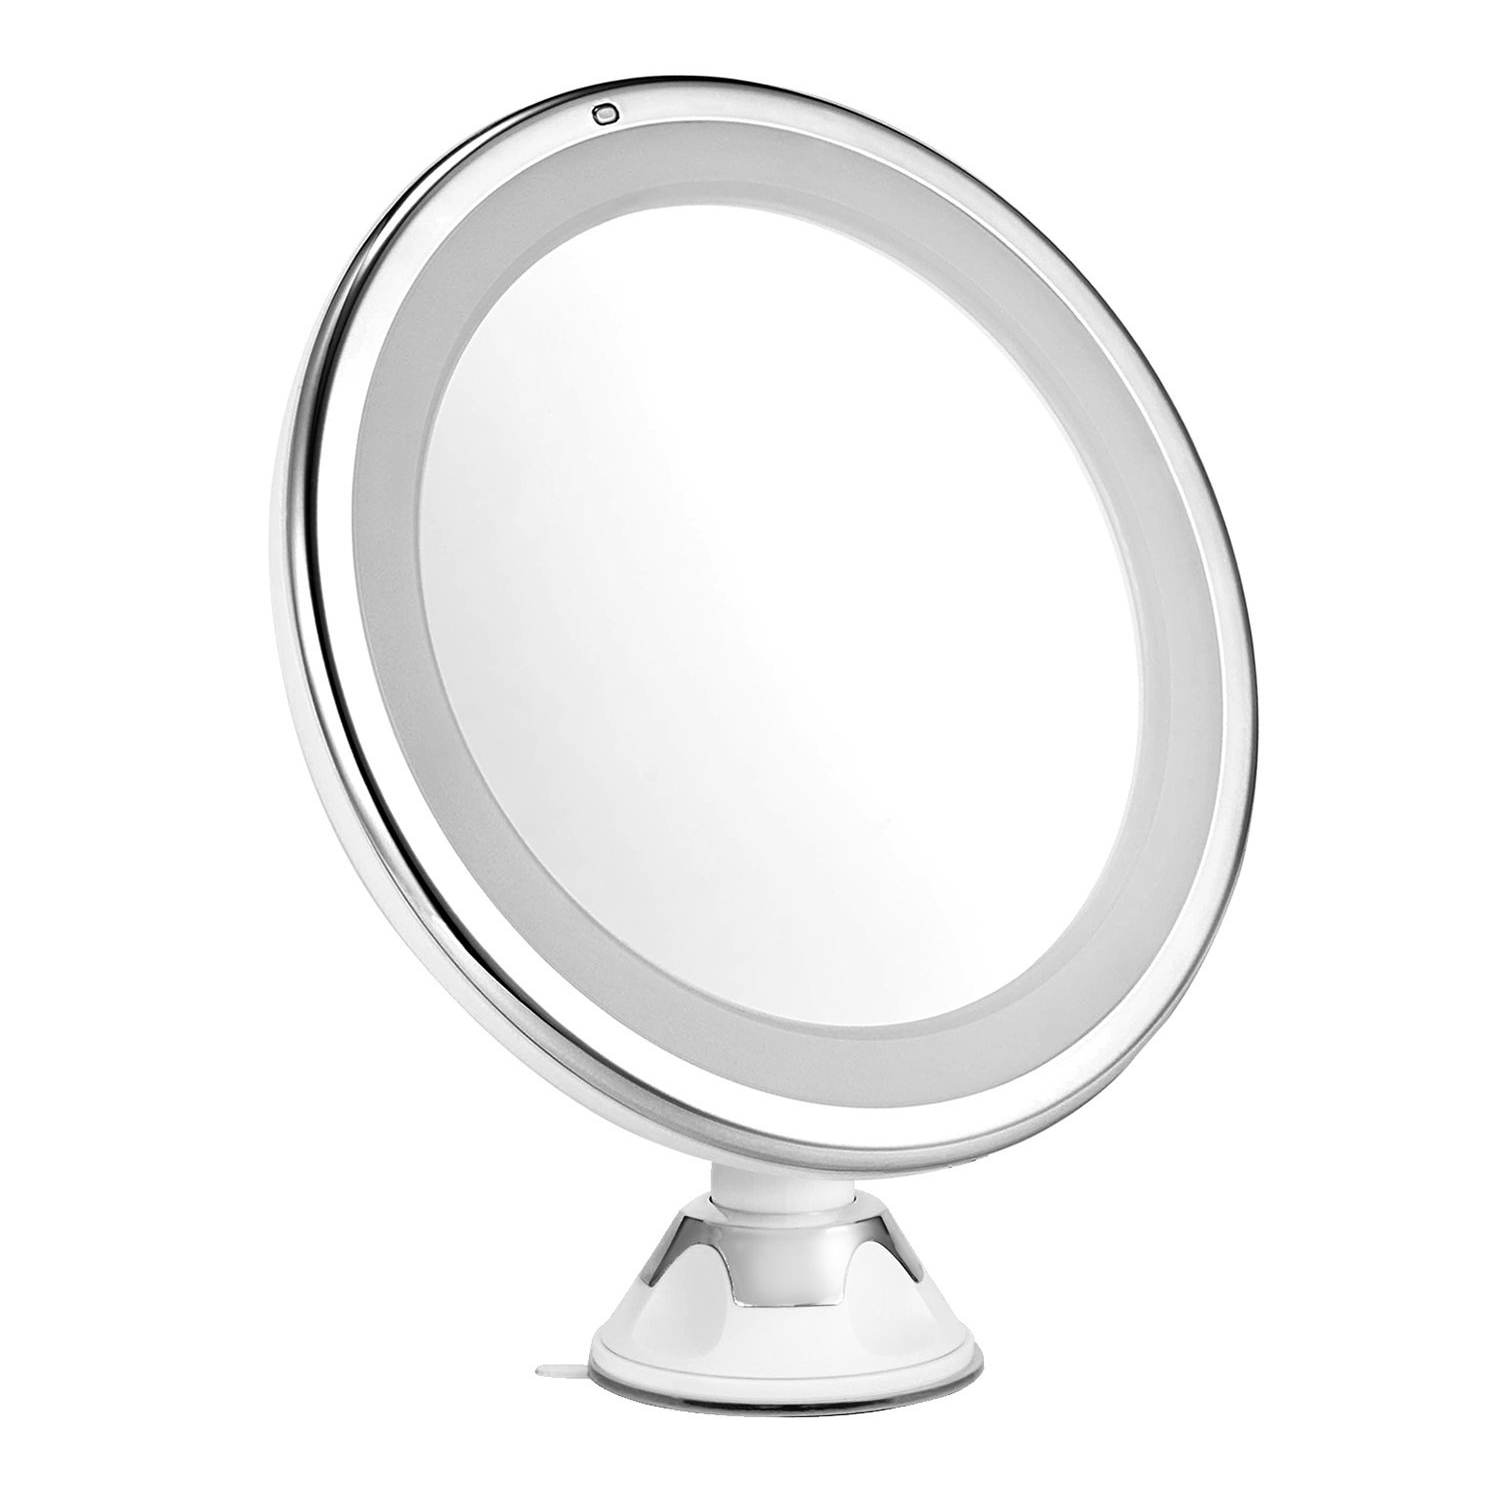 Lighted Makeup Mirror Only $13.99 on Amazon! (Reg $19.99)